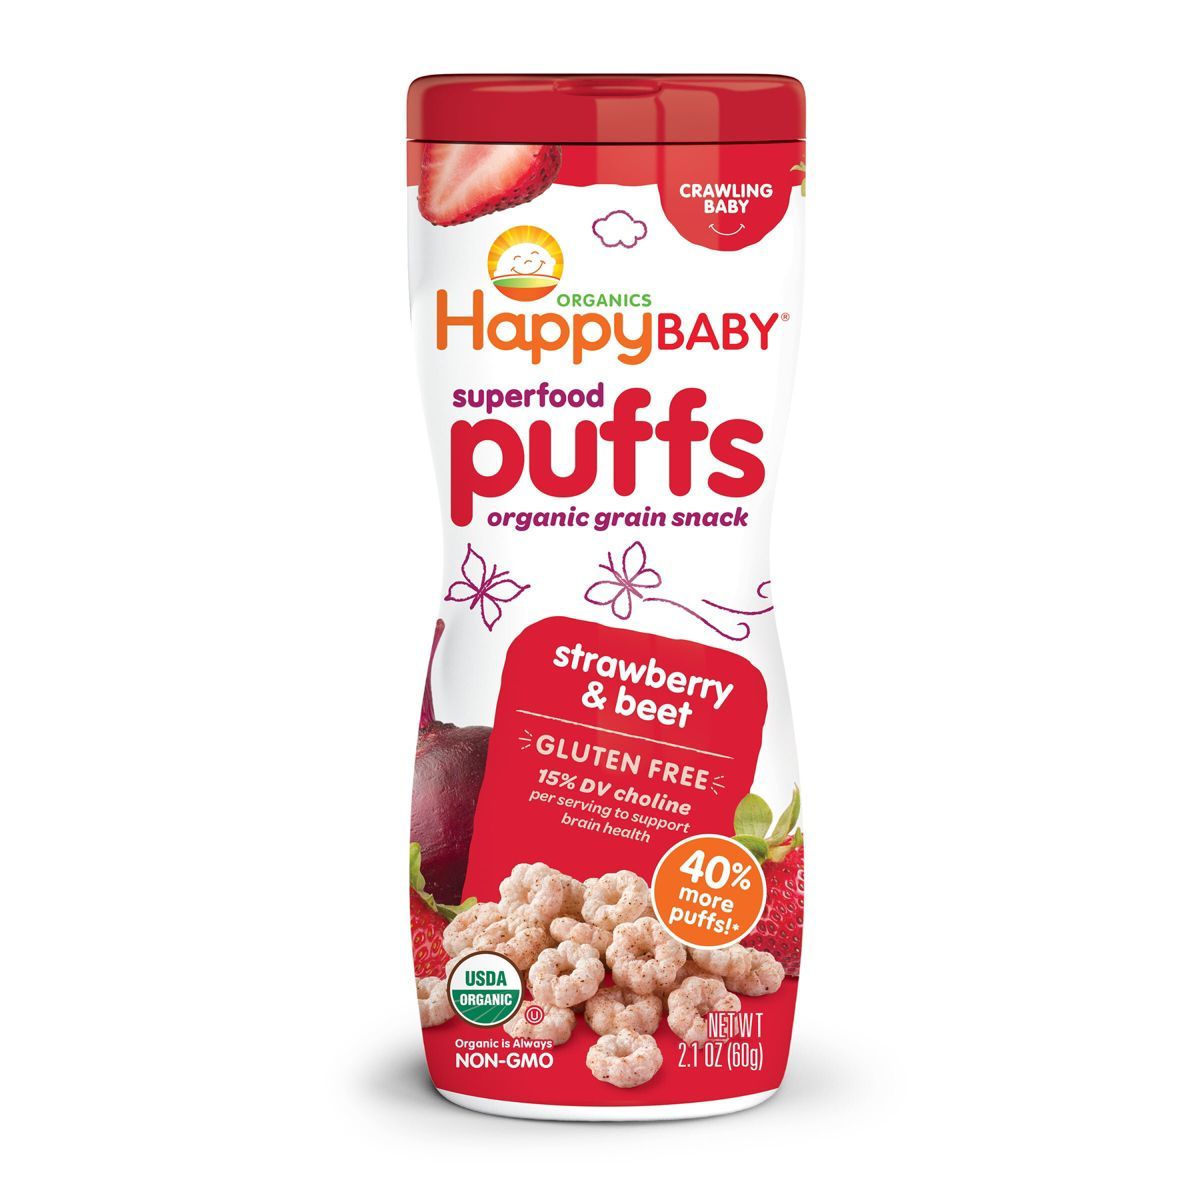 HappyBaby Strawberry & Beet Superfood Baby Puffs - 2.1oz | Target